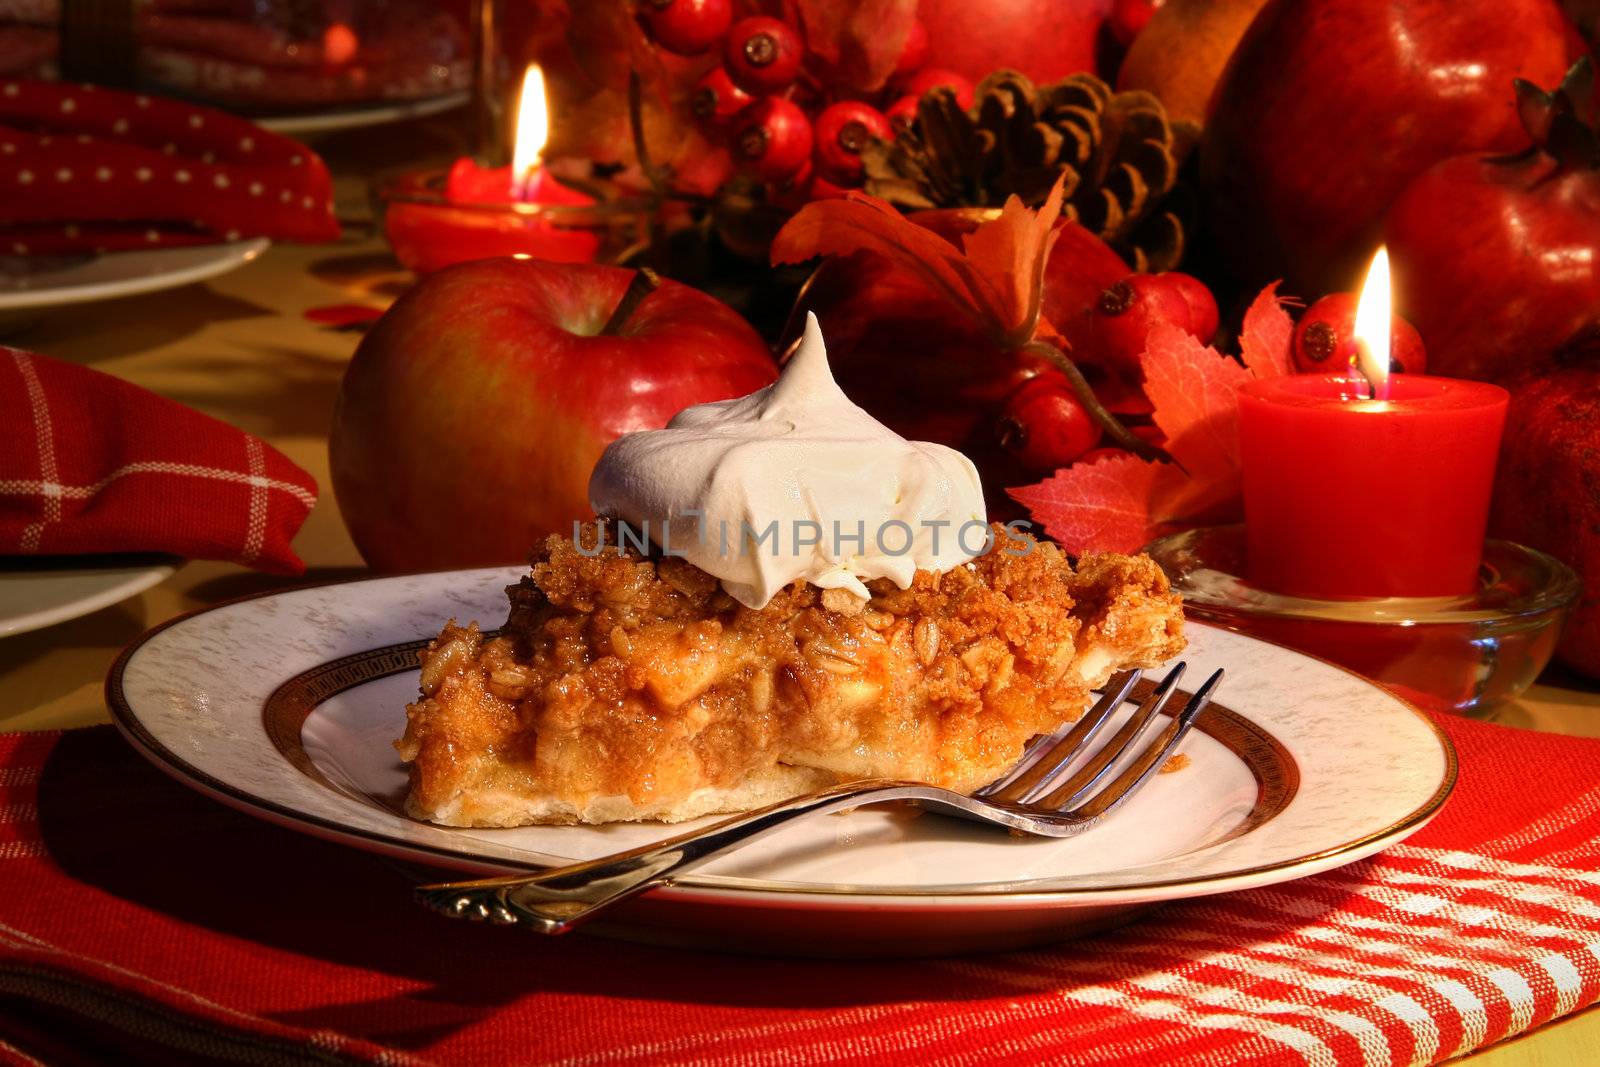 Delicious apple crumble pie for the holidays